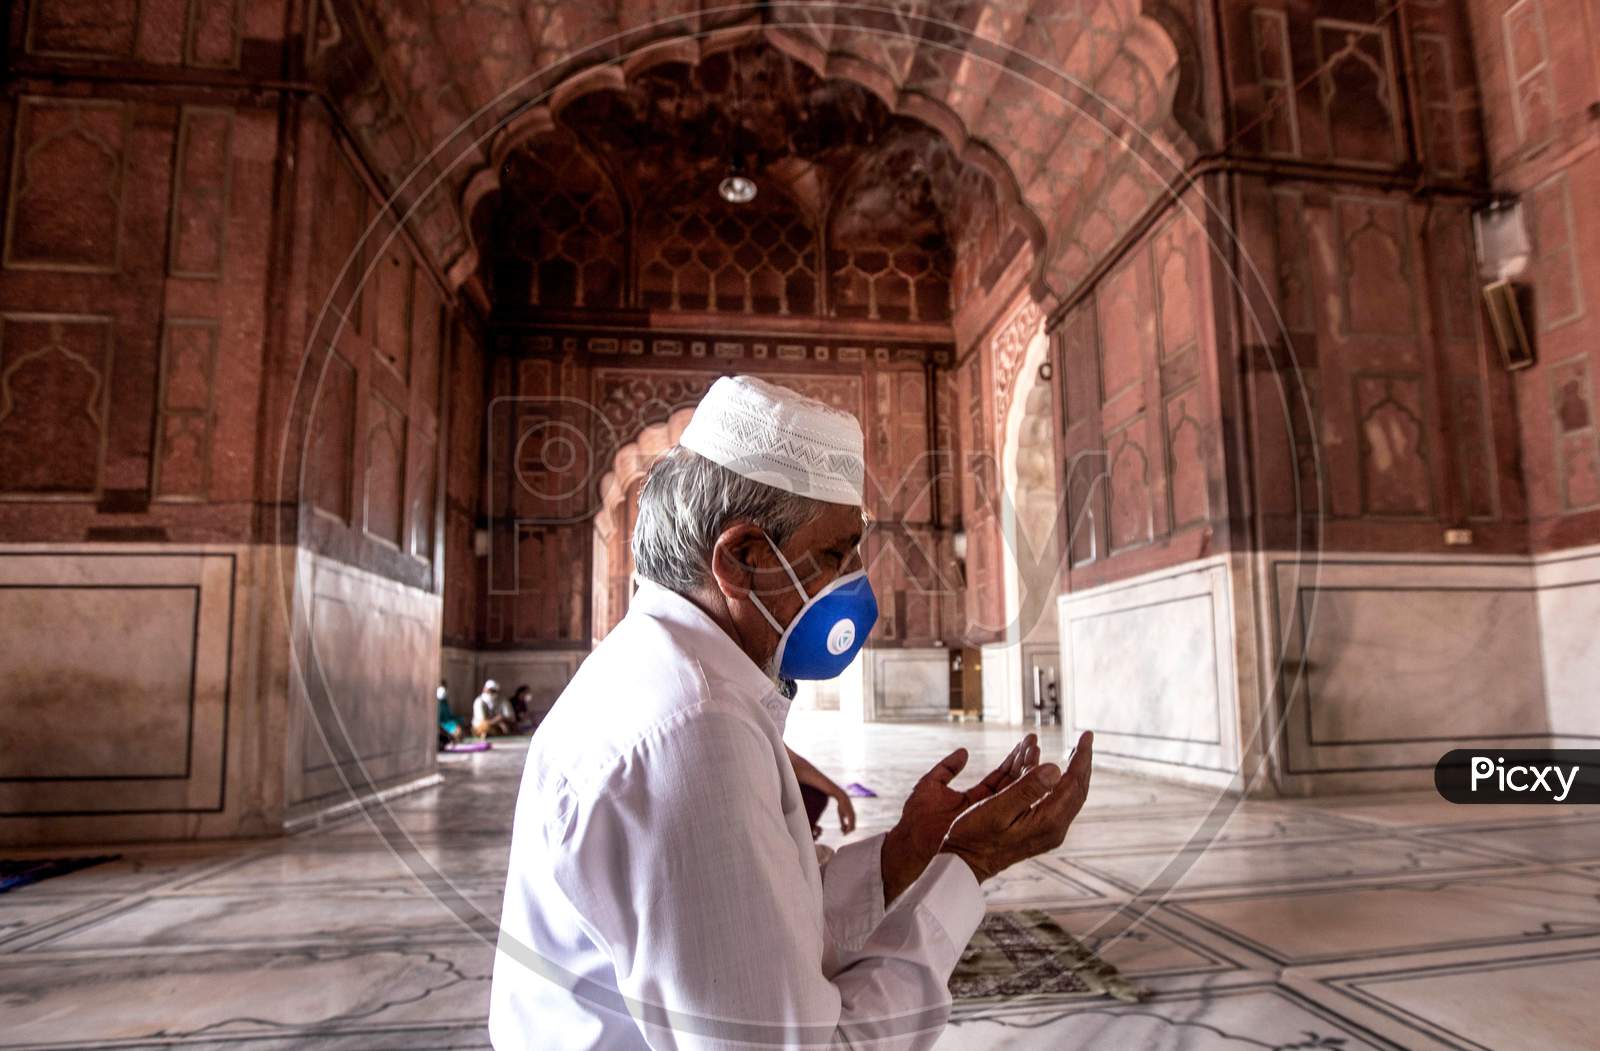 Muslims offer Prayers Inside Jama Masjid After The Opening Of Most Of The Religious Places As India Eases Lockdown Restrictions That Were Imposed To Slow The Spread Of The Coronavirus Disease (Covid-19), In The Old Quarters Of Delhi, India, June 8, 2020.